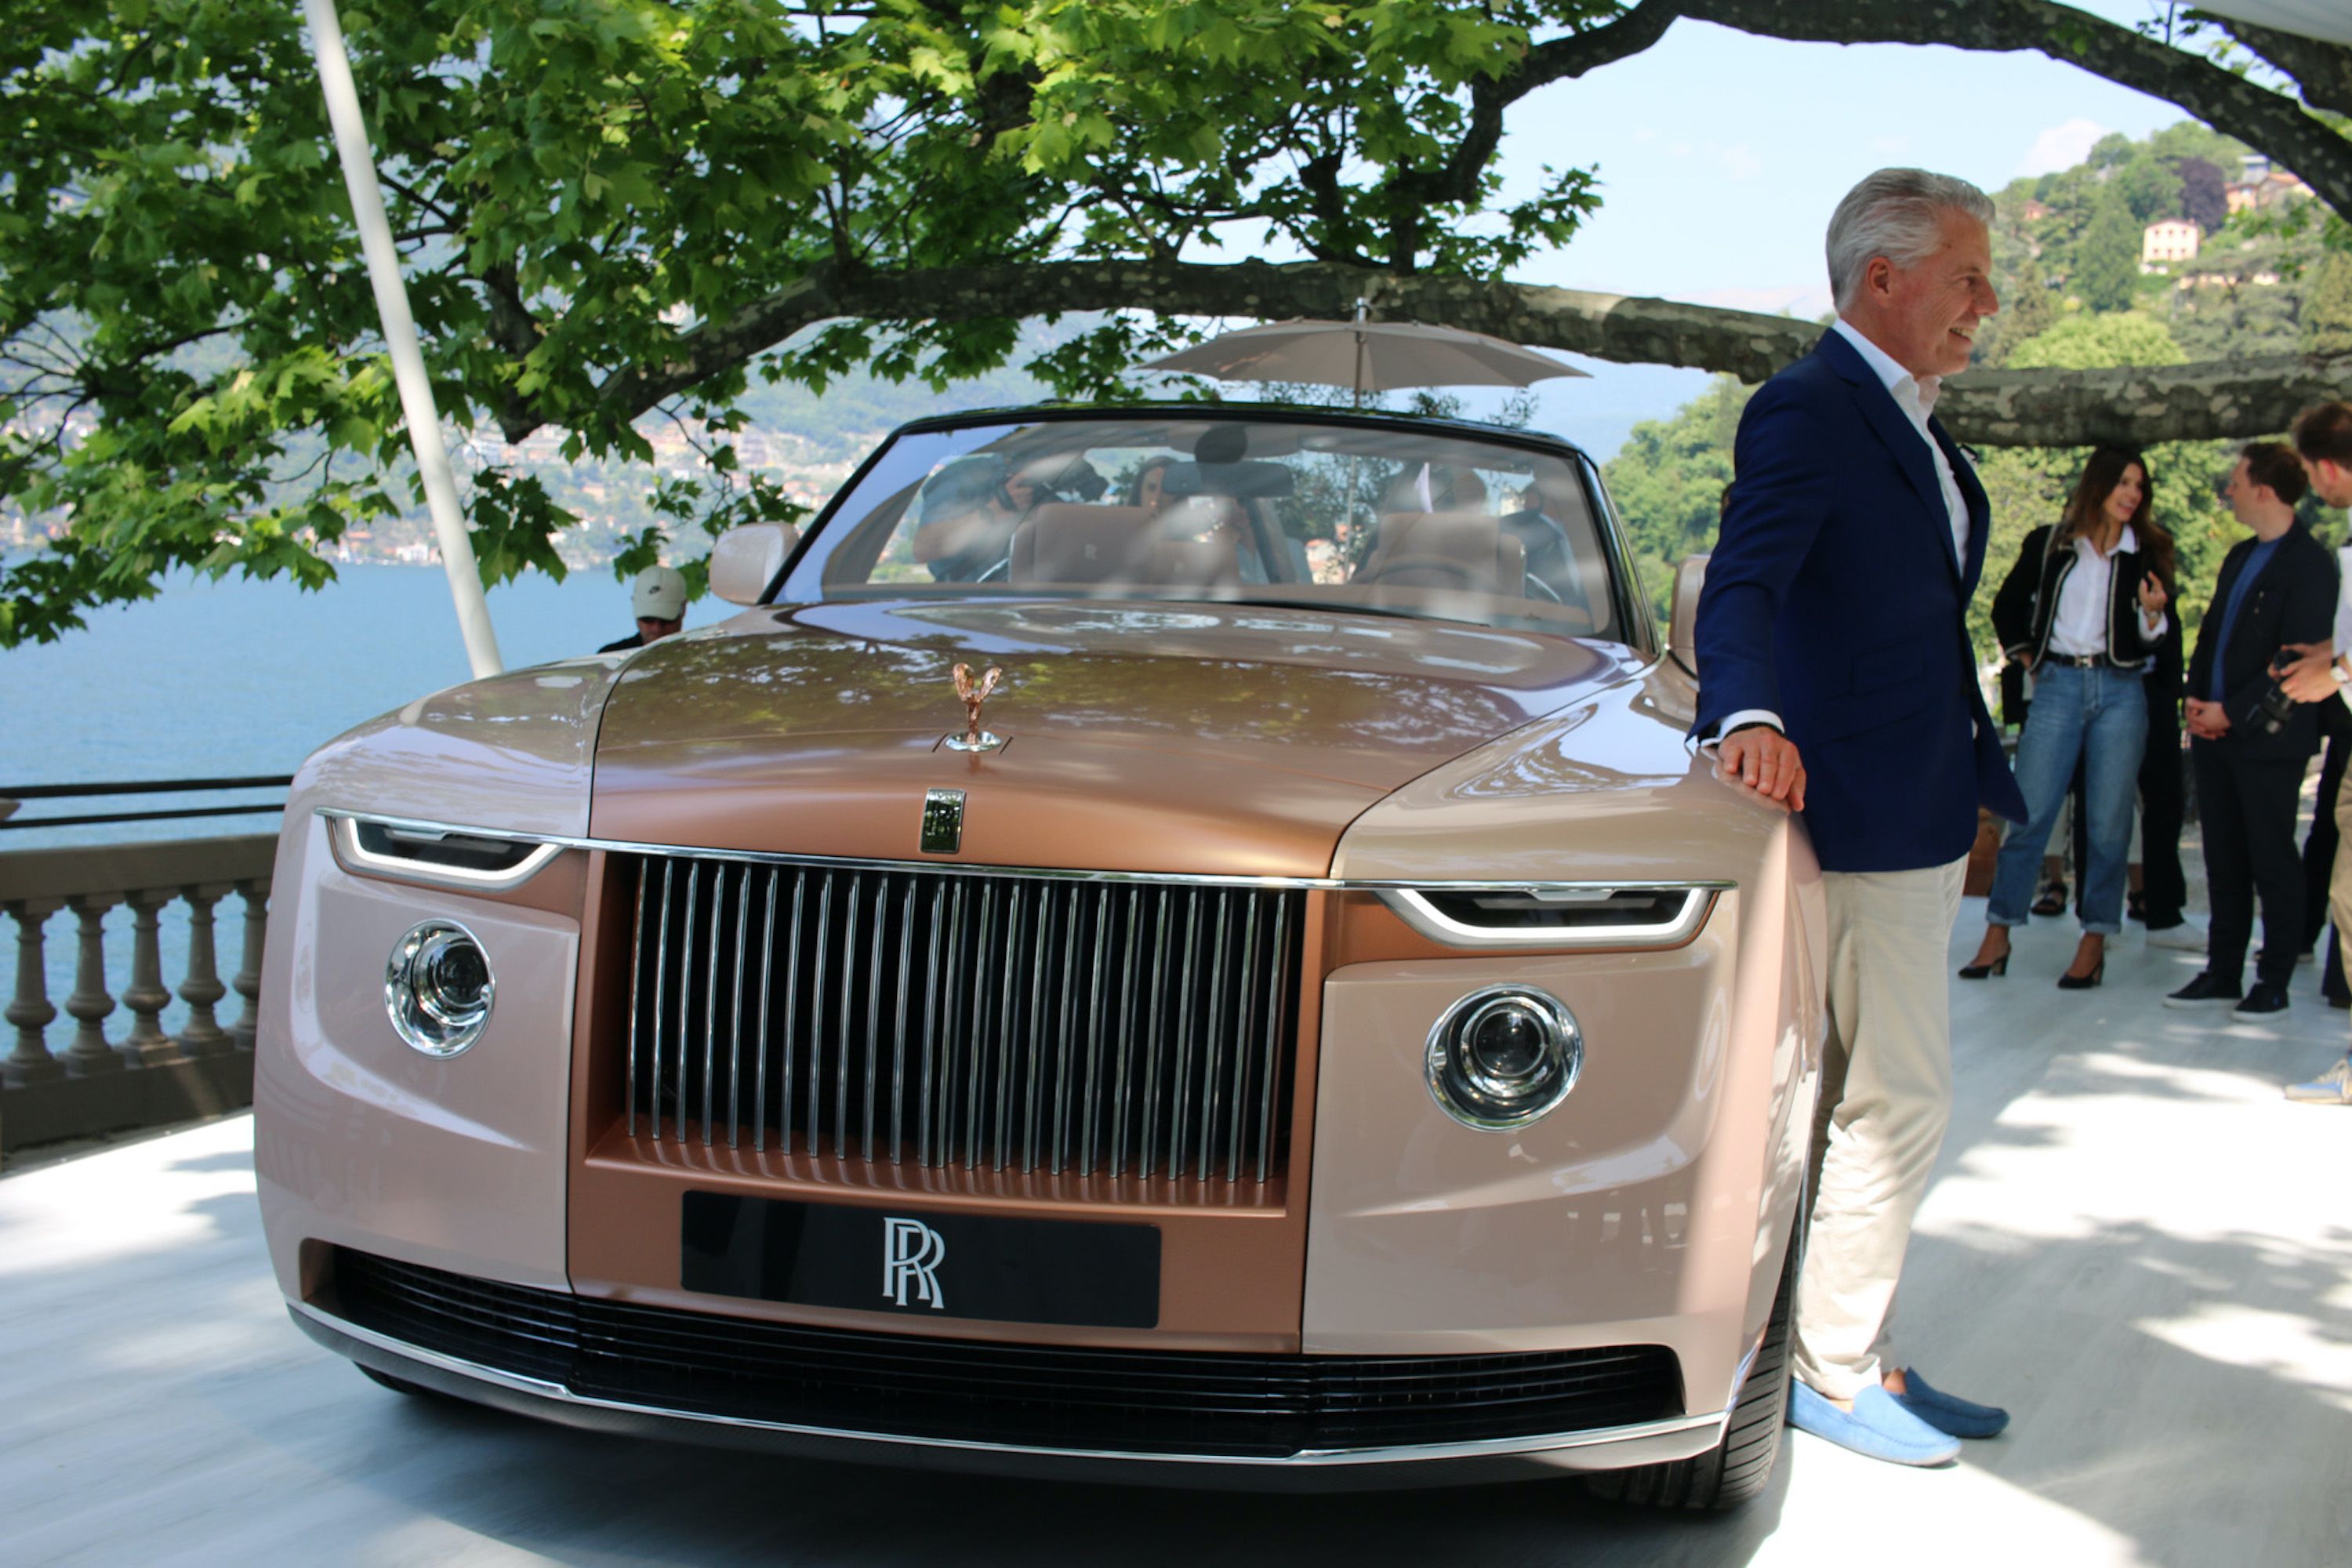 RollsRoyce drives up car luxury with Boat Tail  Lifestyle  The Jakarta  Post